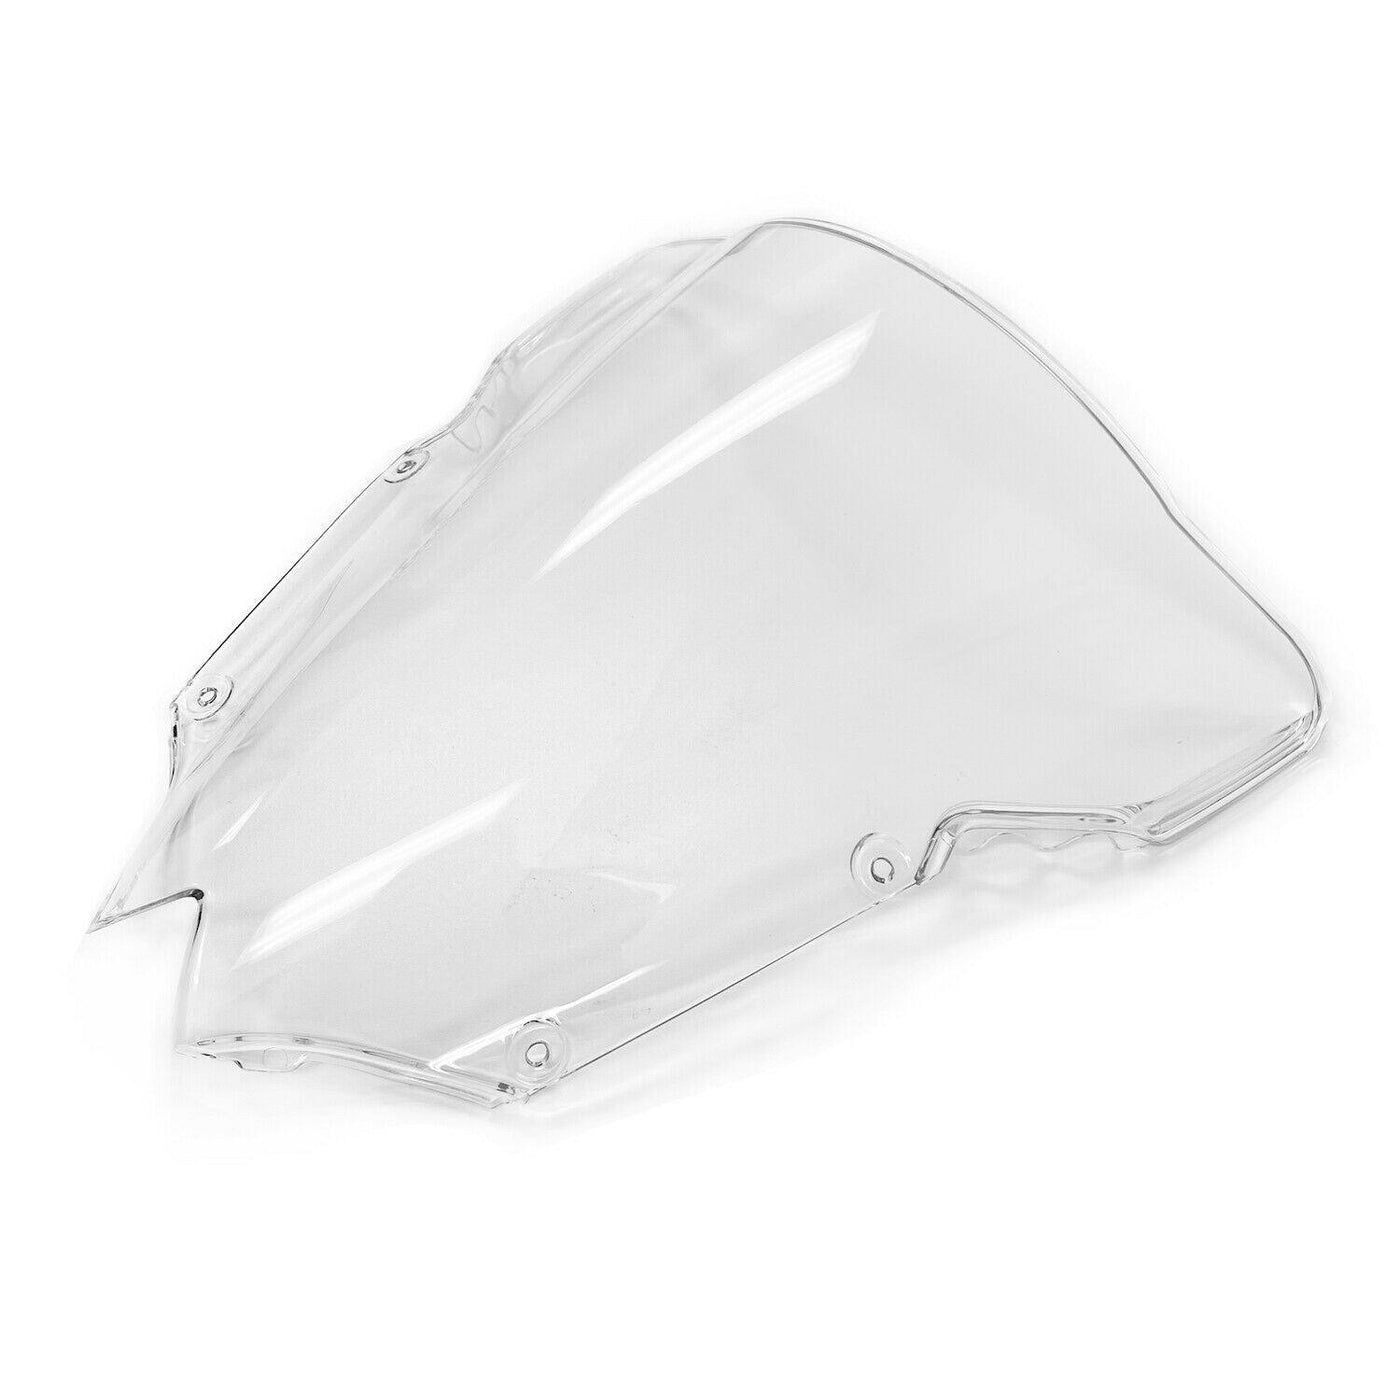 Windshield Double Bubble For Yamaha YZF R6 2008-2015 Clear Windscreen 08-15 - Moto Life Products